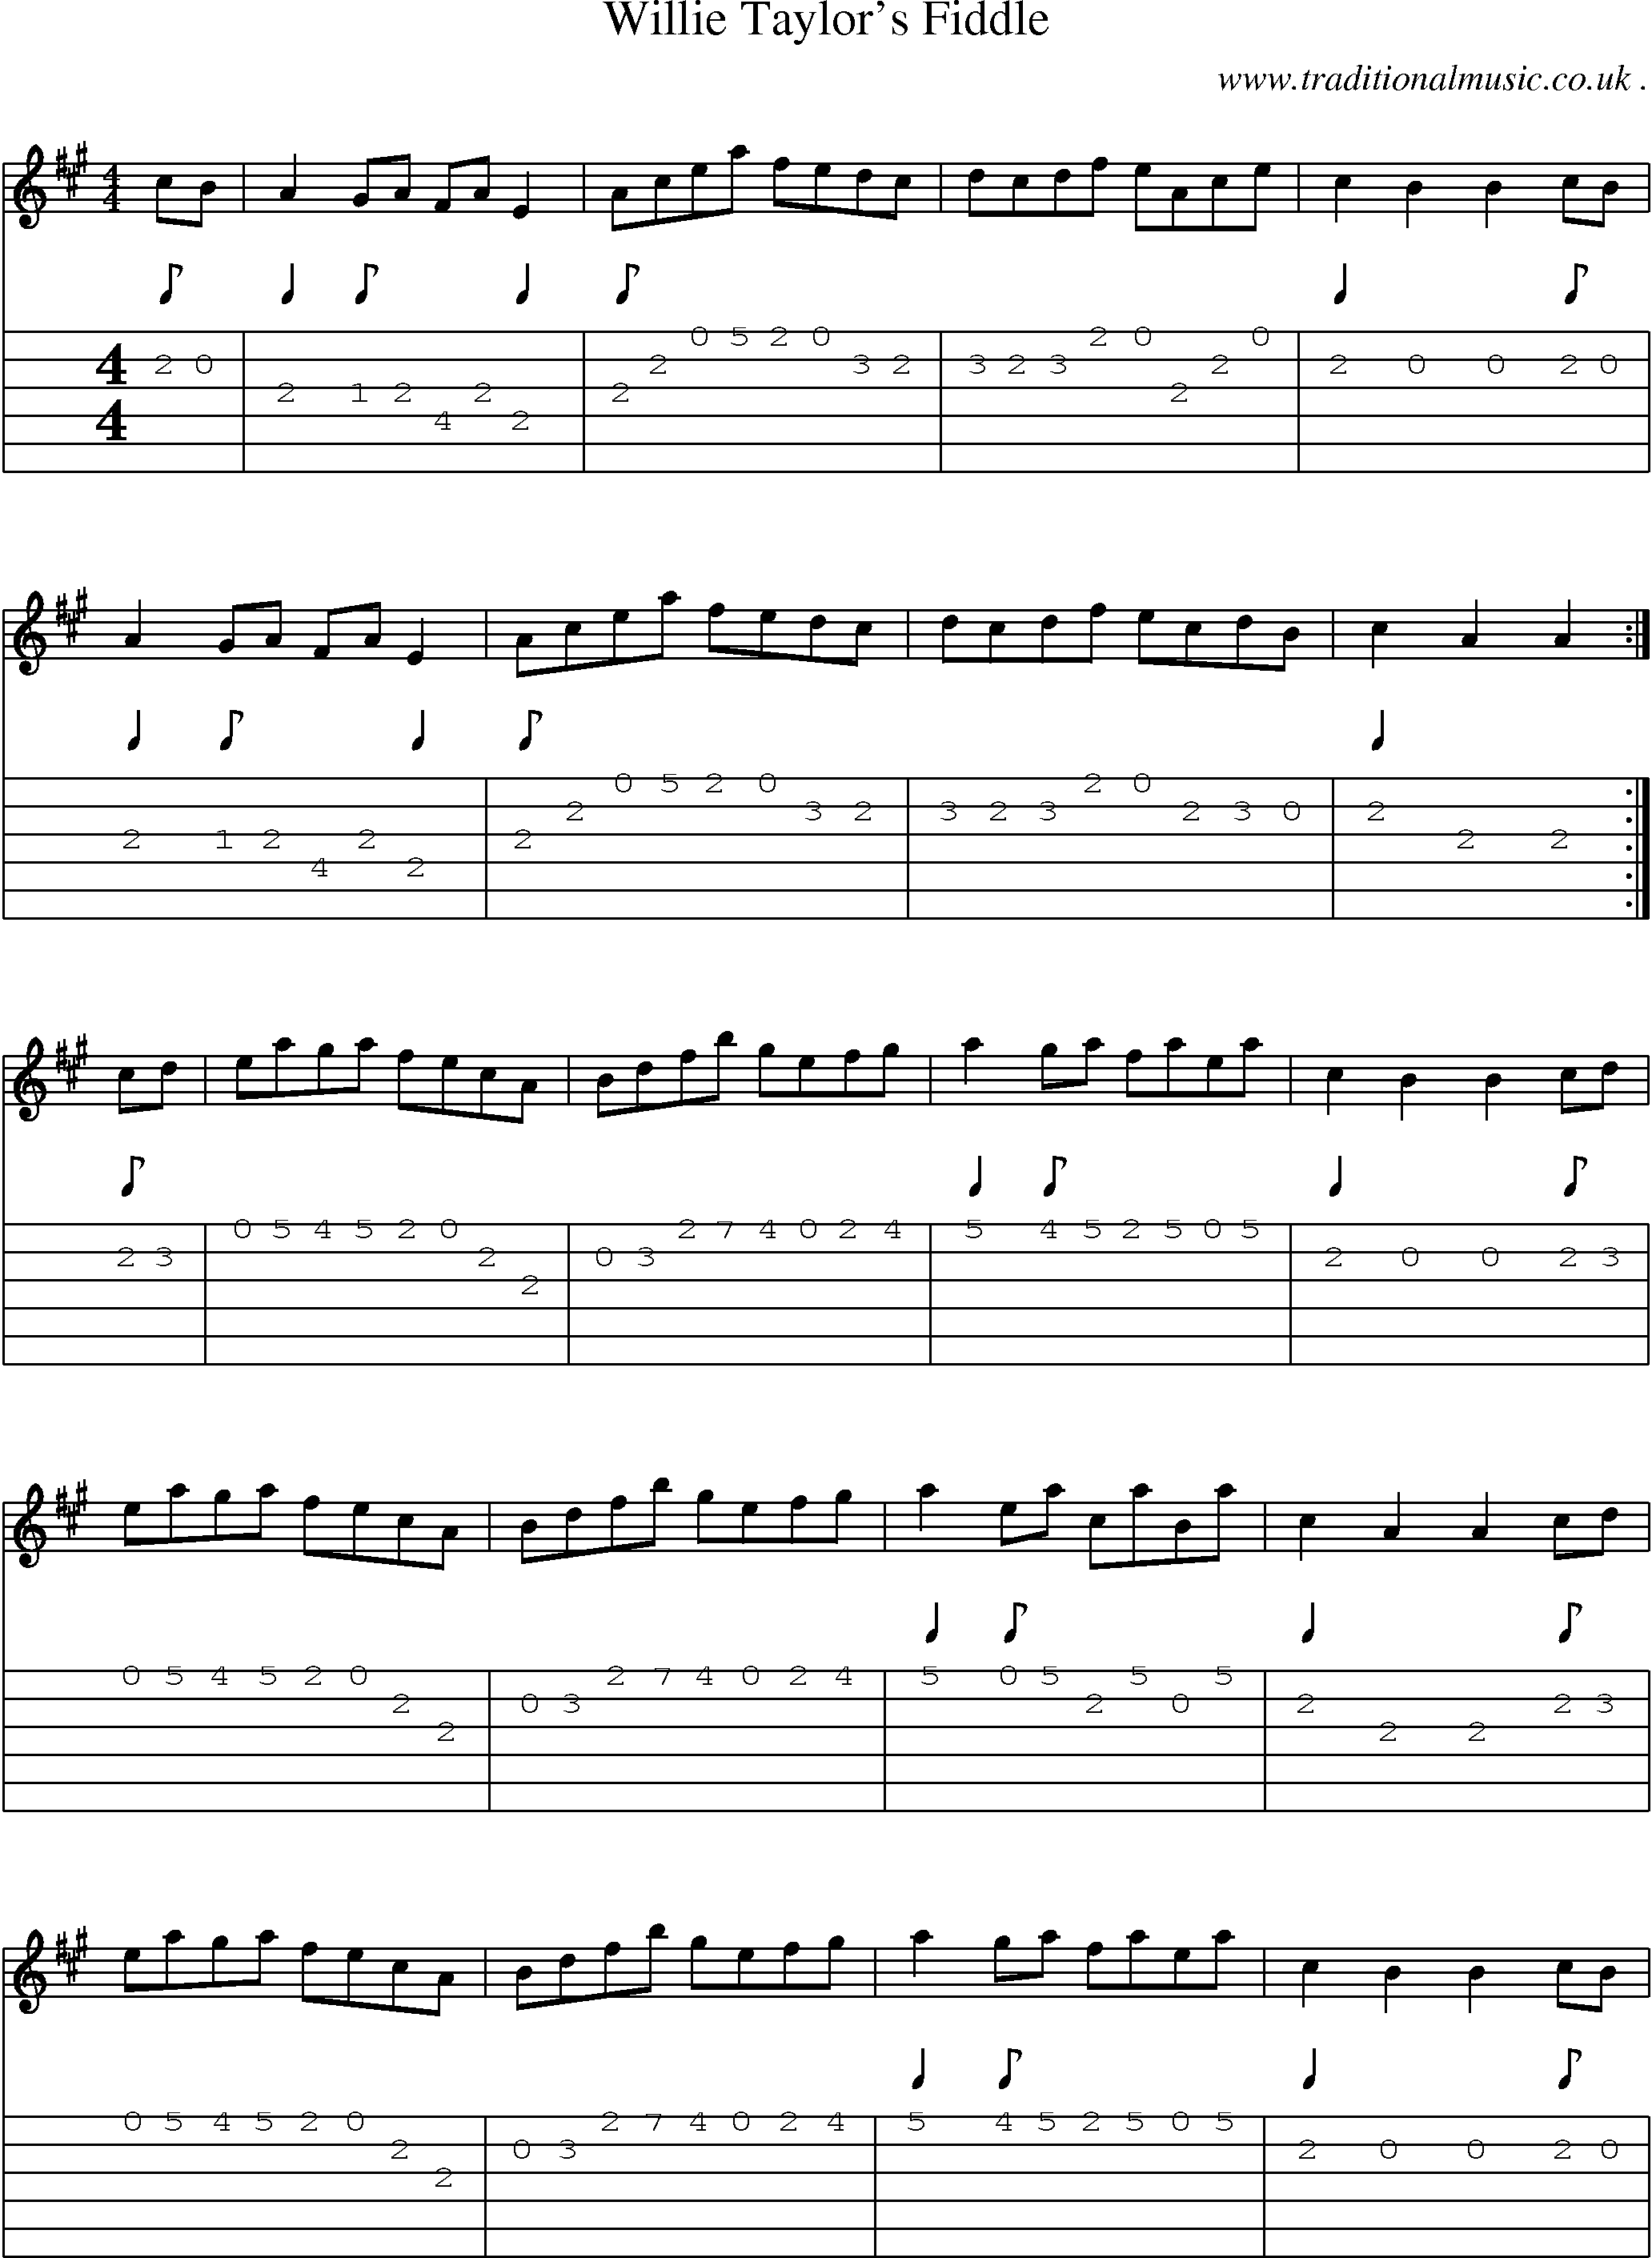 Sheet-music  score, Chords and Guitar Tabs for Willie Taylors Fiddle